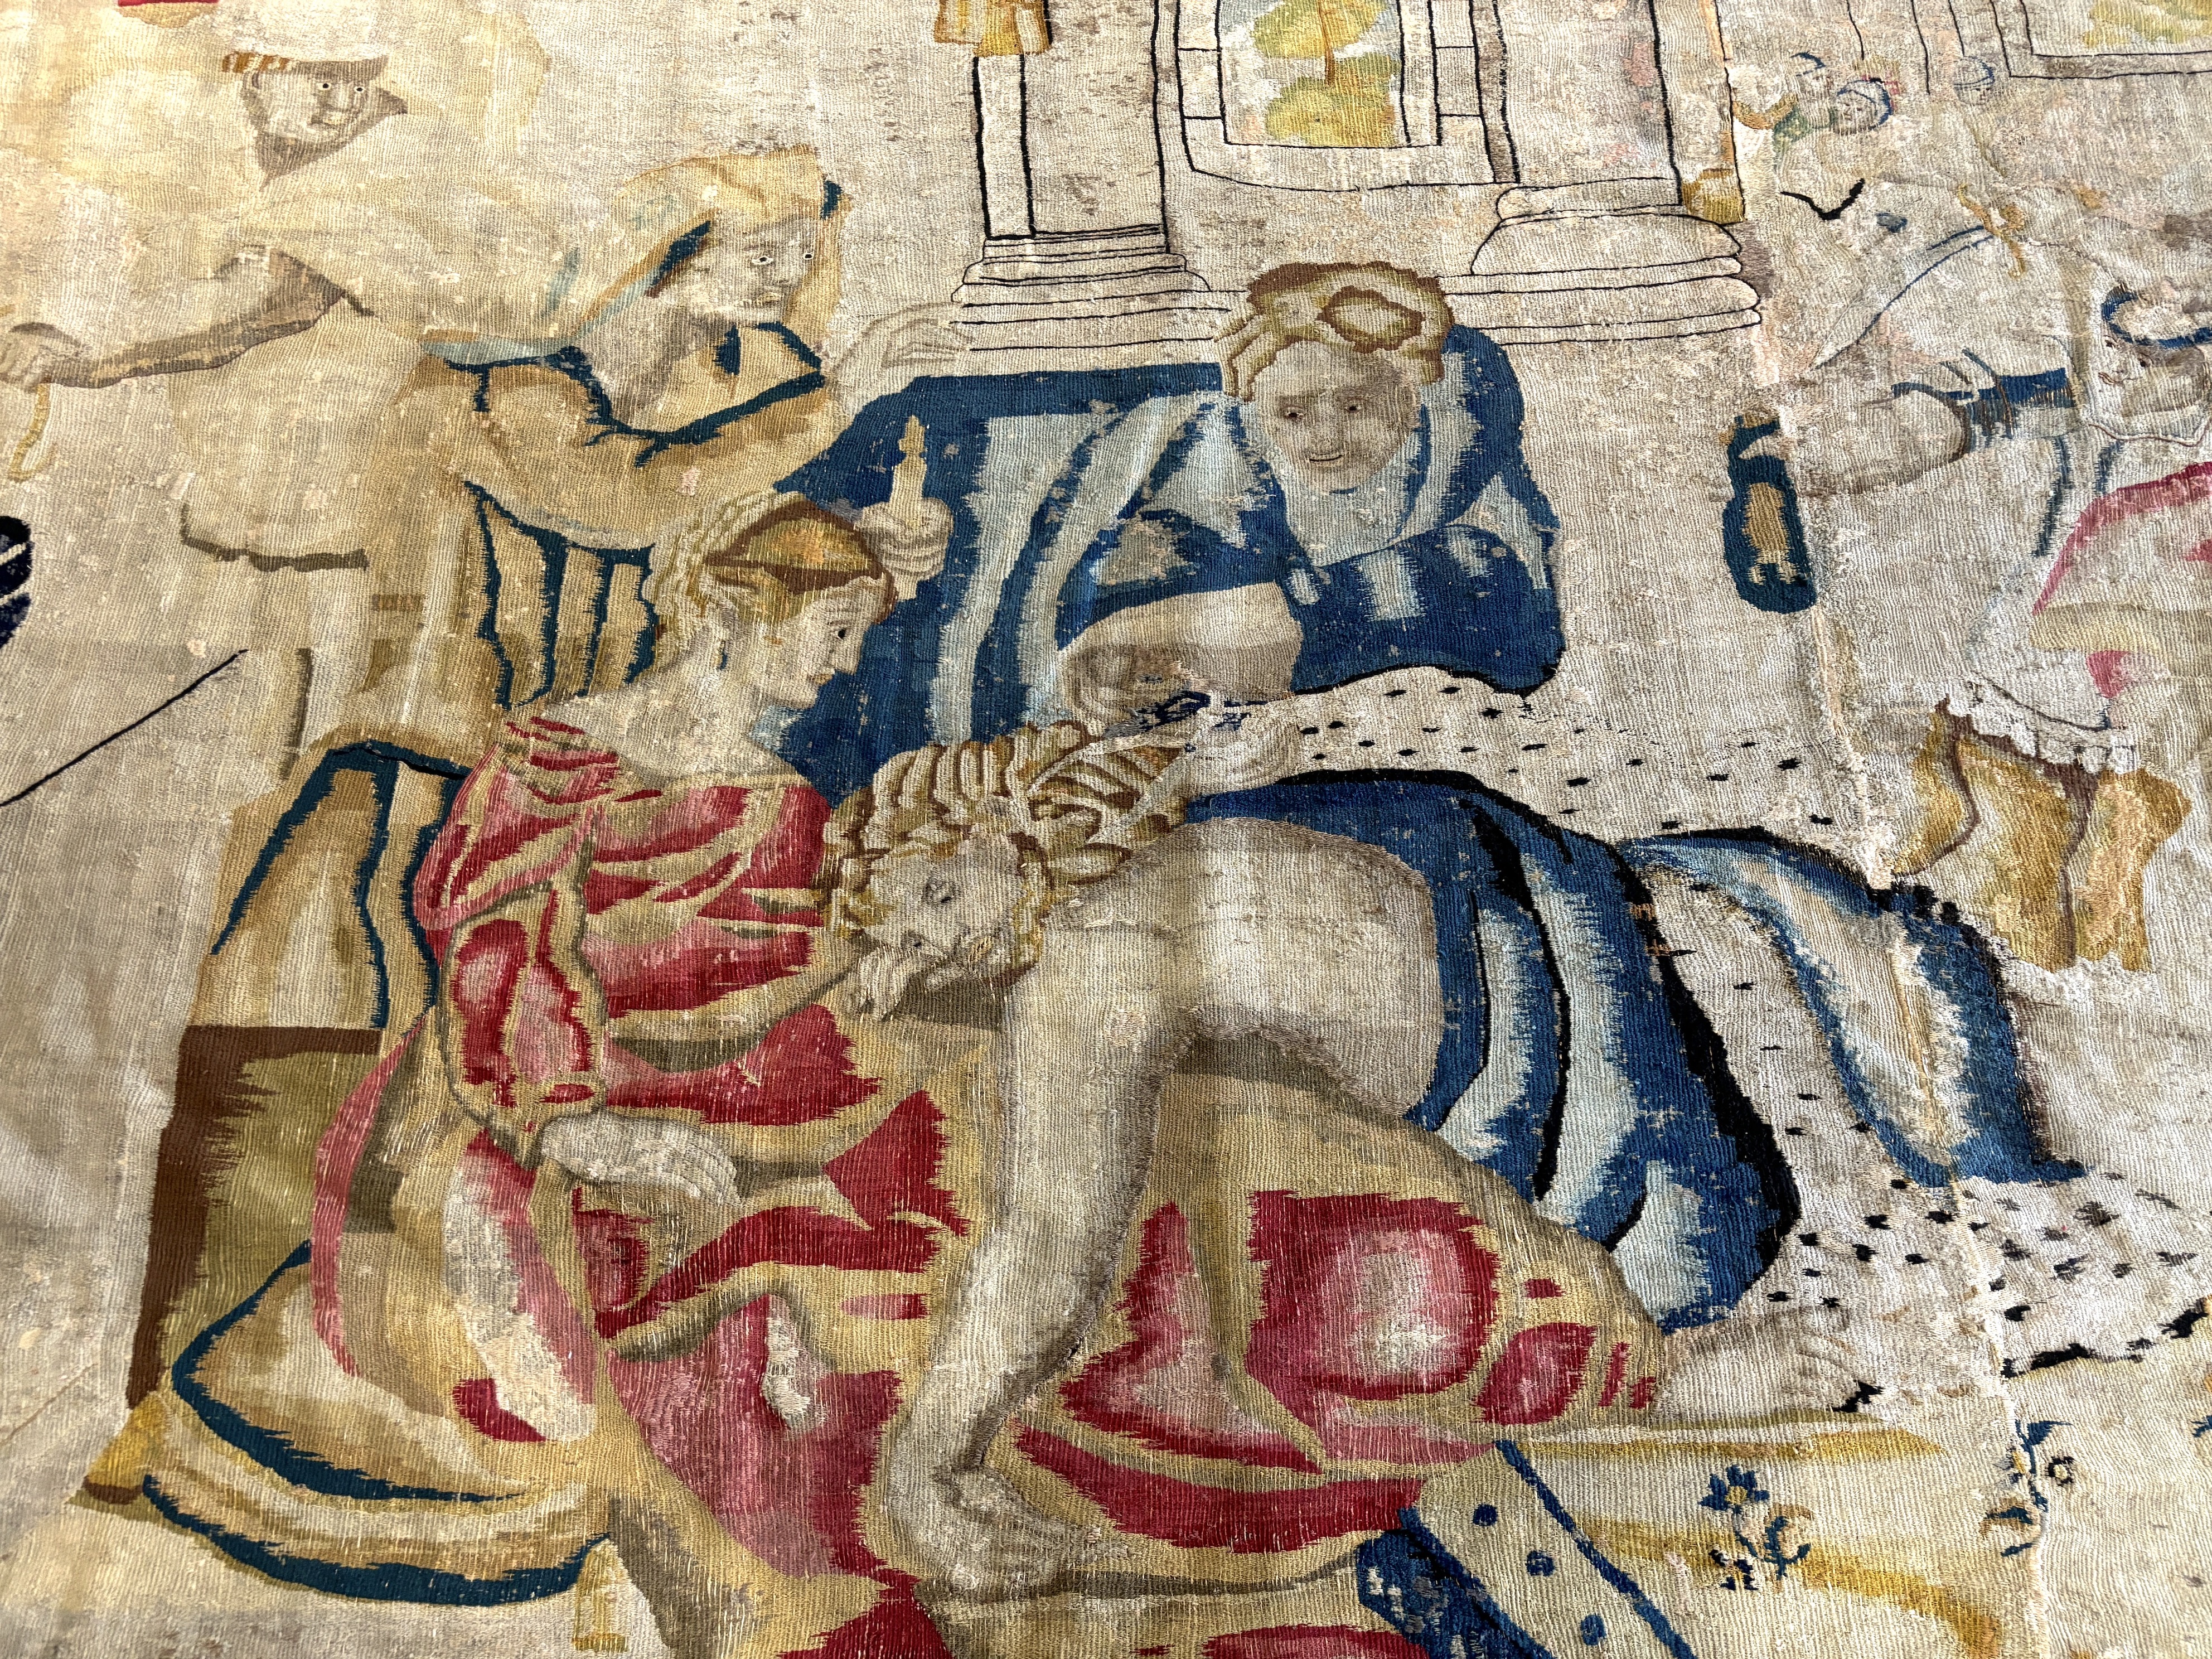 A large mid 17th century Flemish tapestry (possibly Antwerp) depicting Samson sleeping in the lap of Delilah while one of the Philistines is cutting off his locks, after the painting by Rubens. Cut in half, then re joine